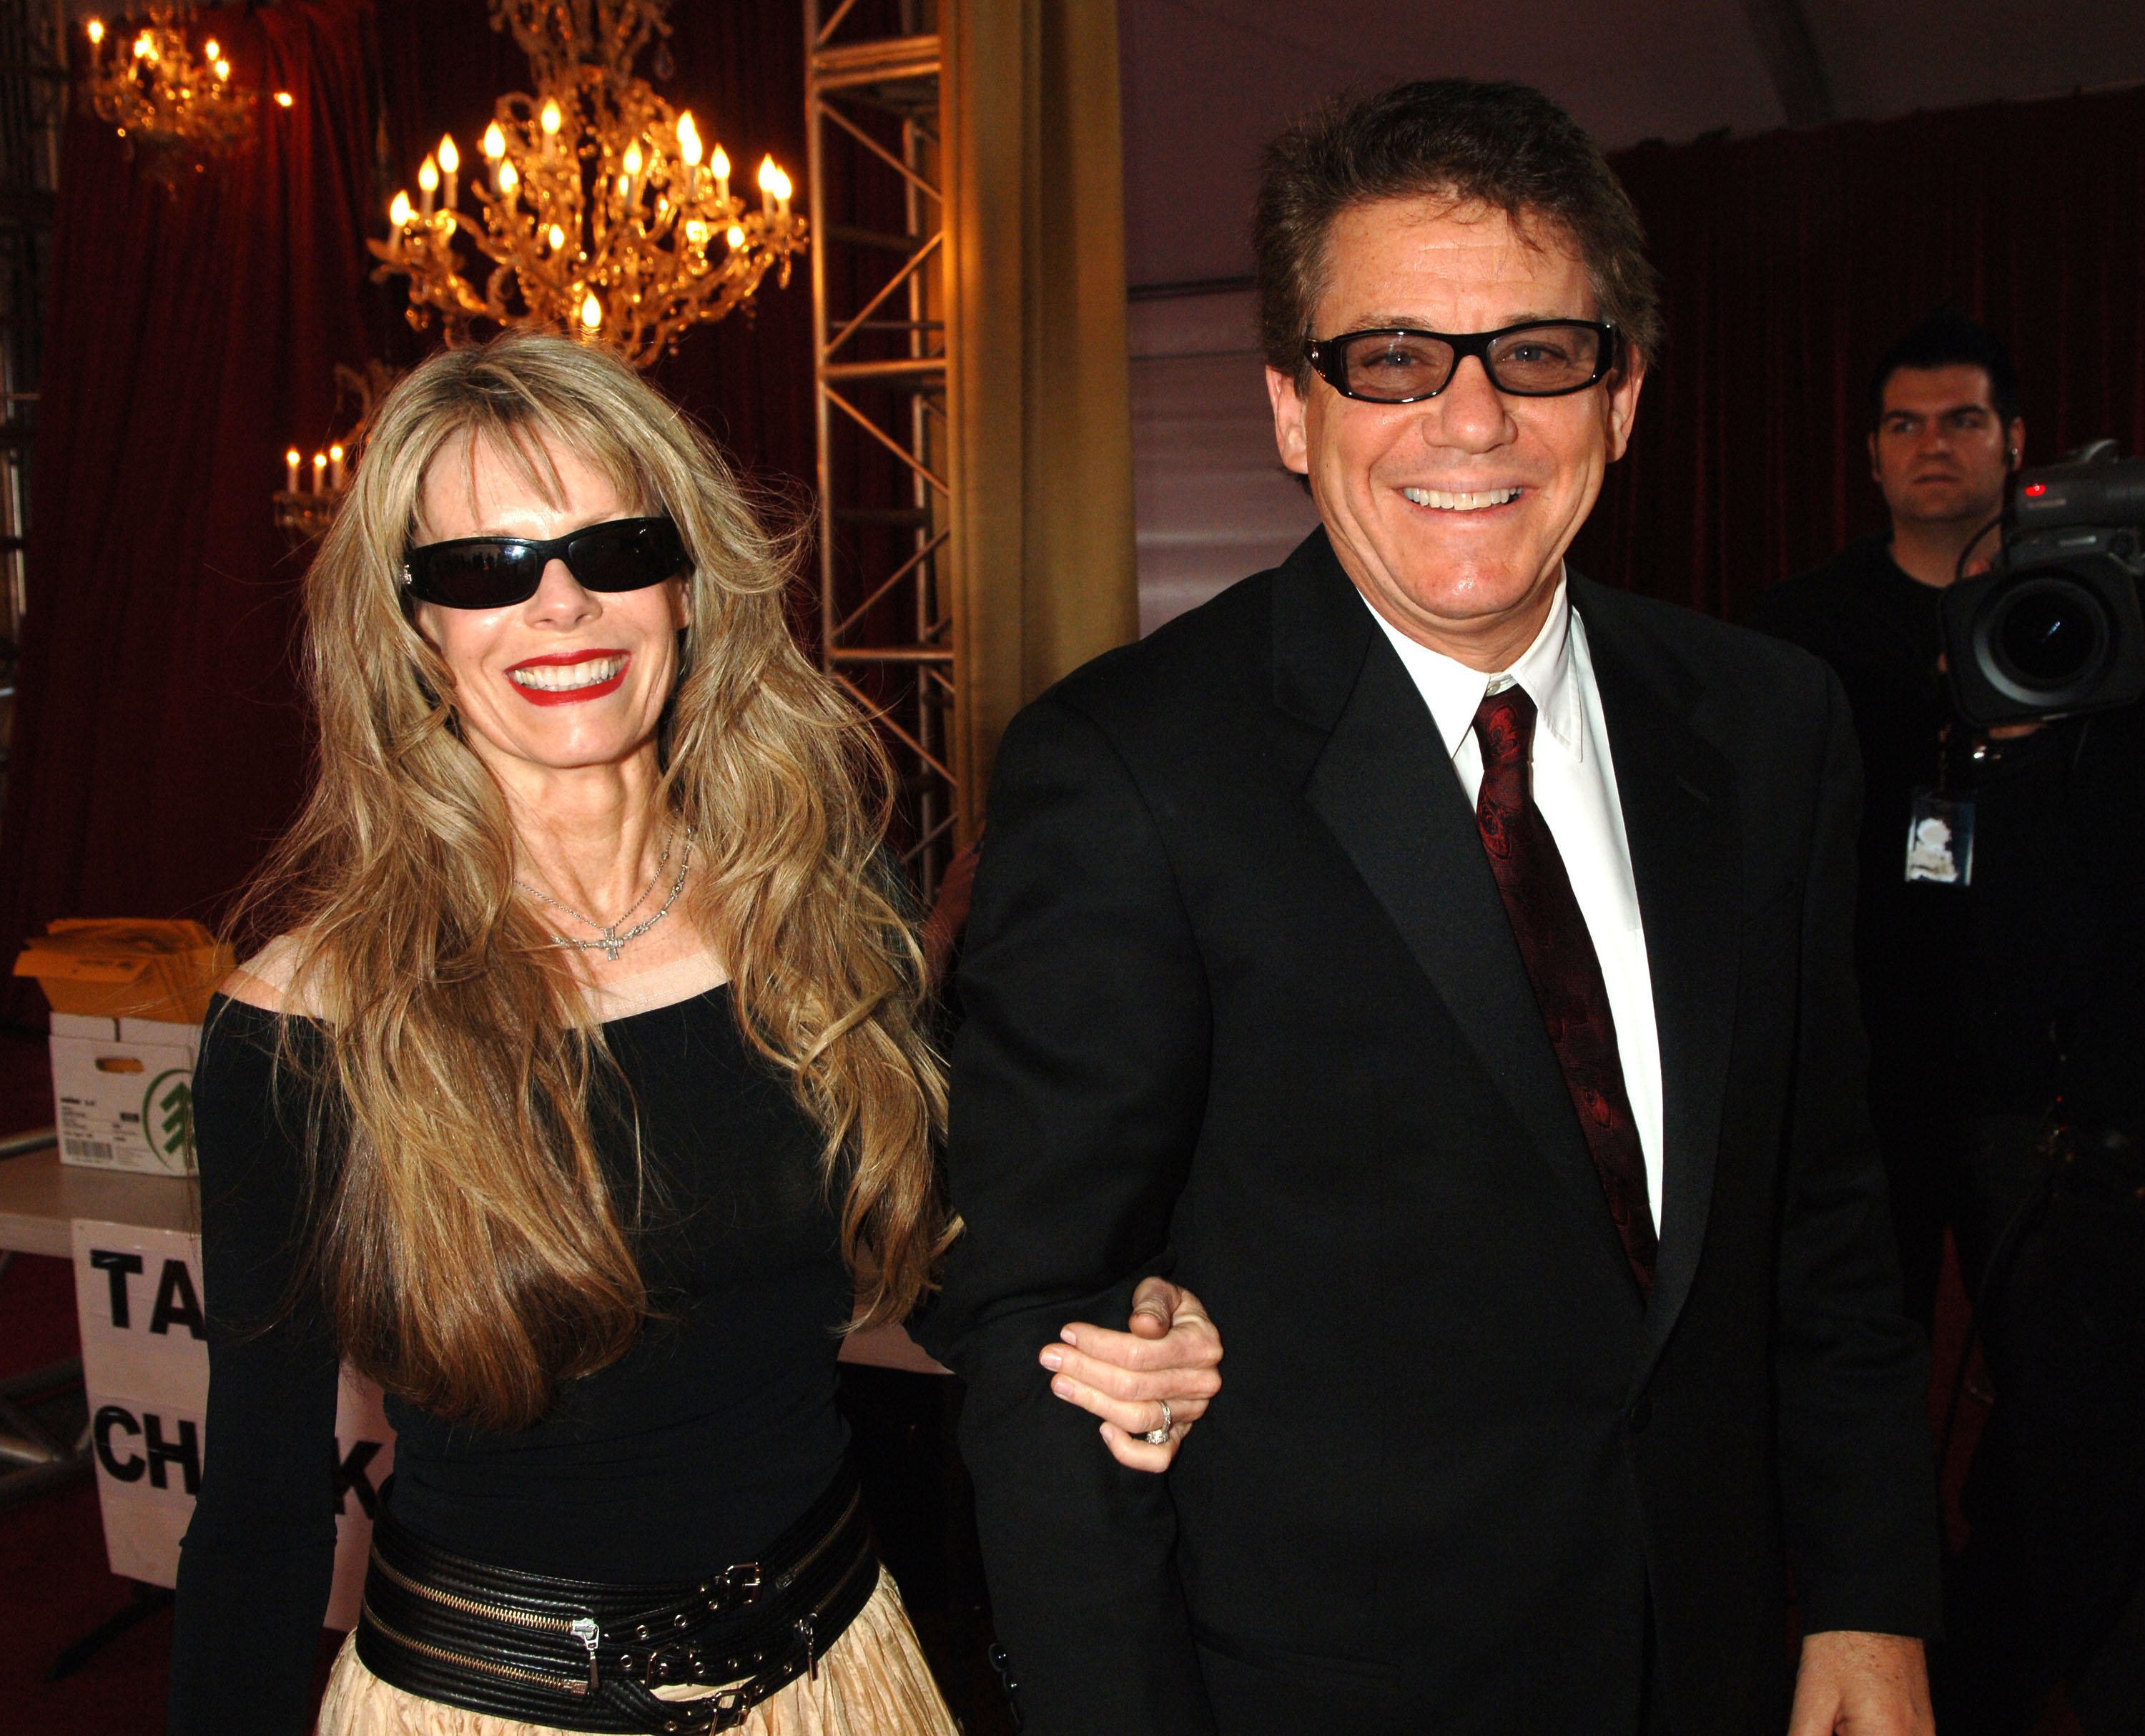 Anson Williams and Jackie Gerken in California in 2006. | Source: Getty Images 